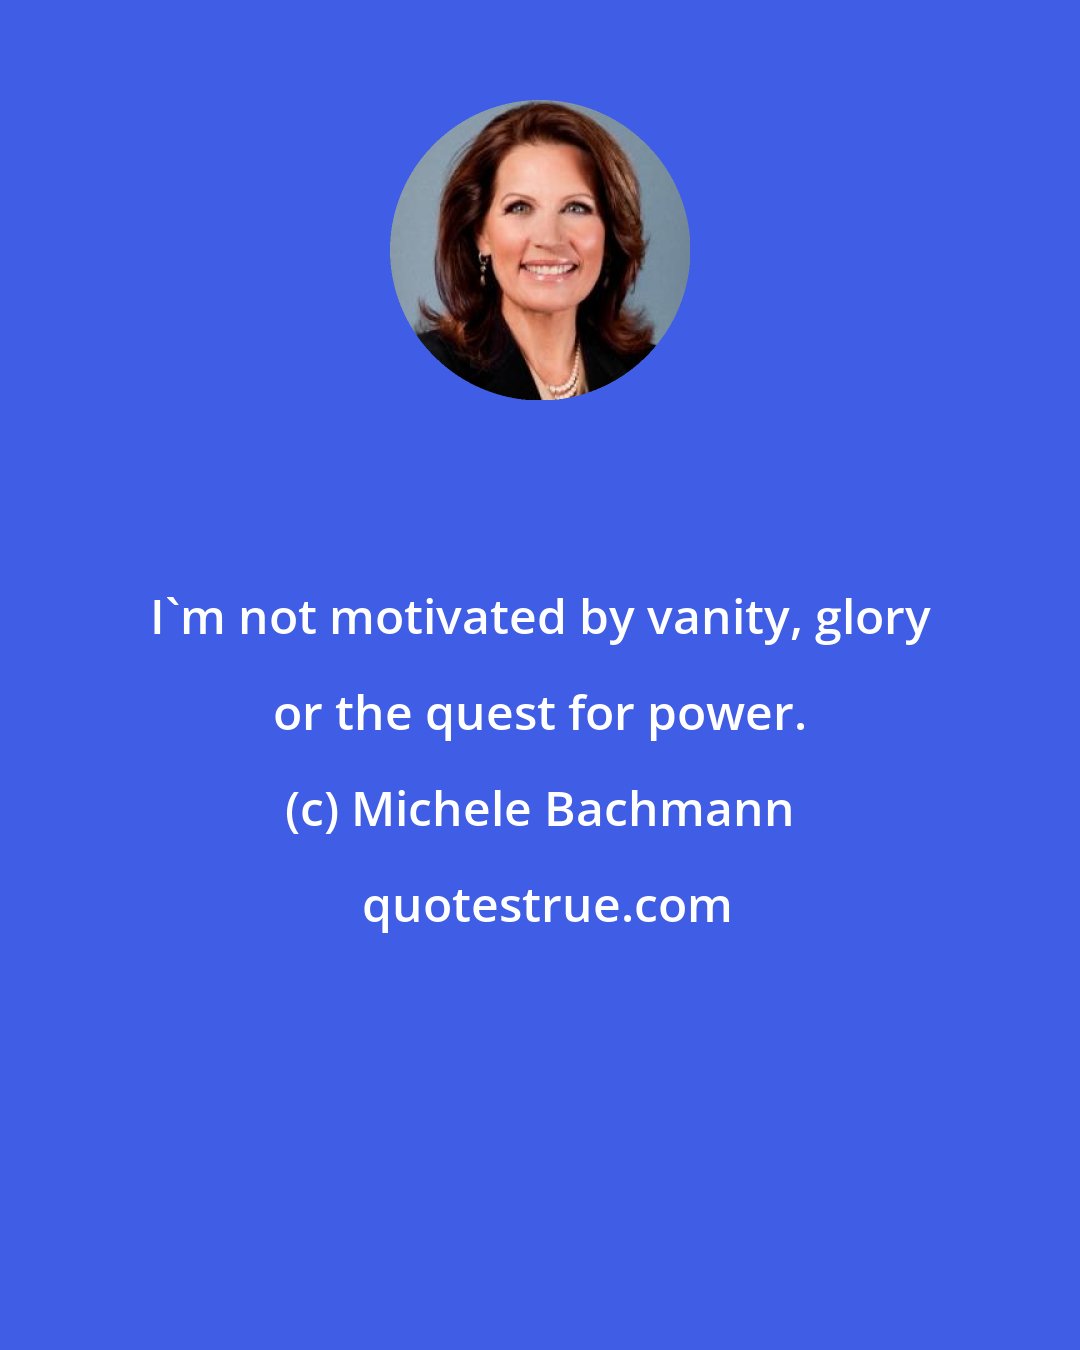 Michele Bachmann: I'm not motivated by vanity, glory or the quest for power.